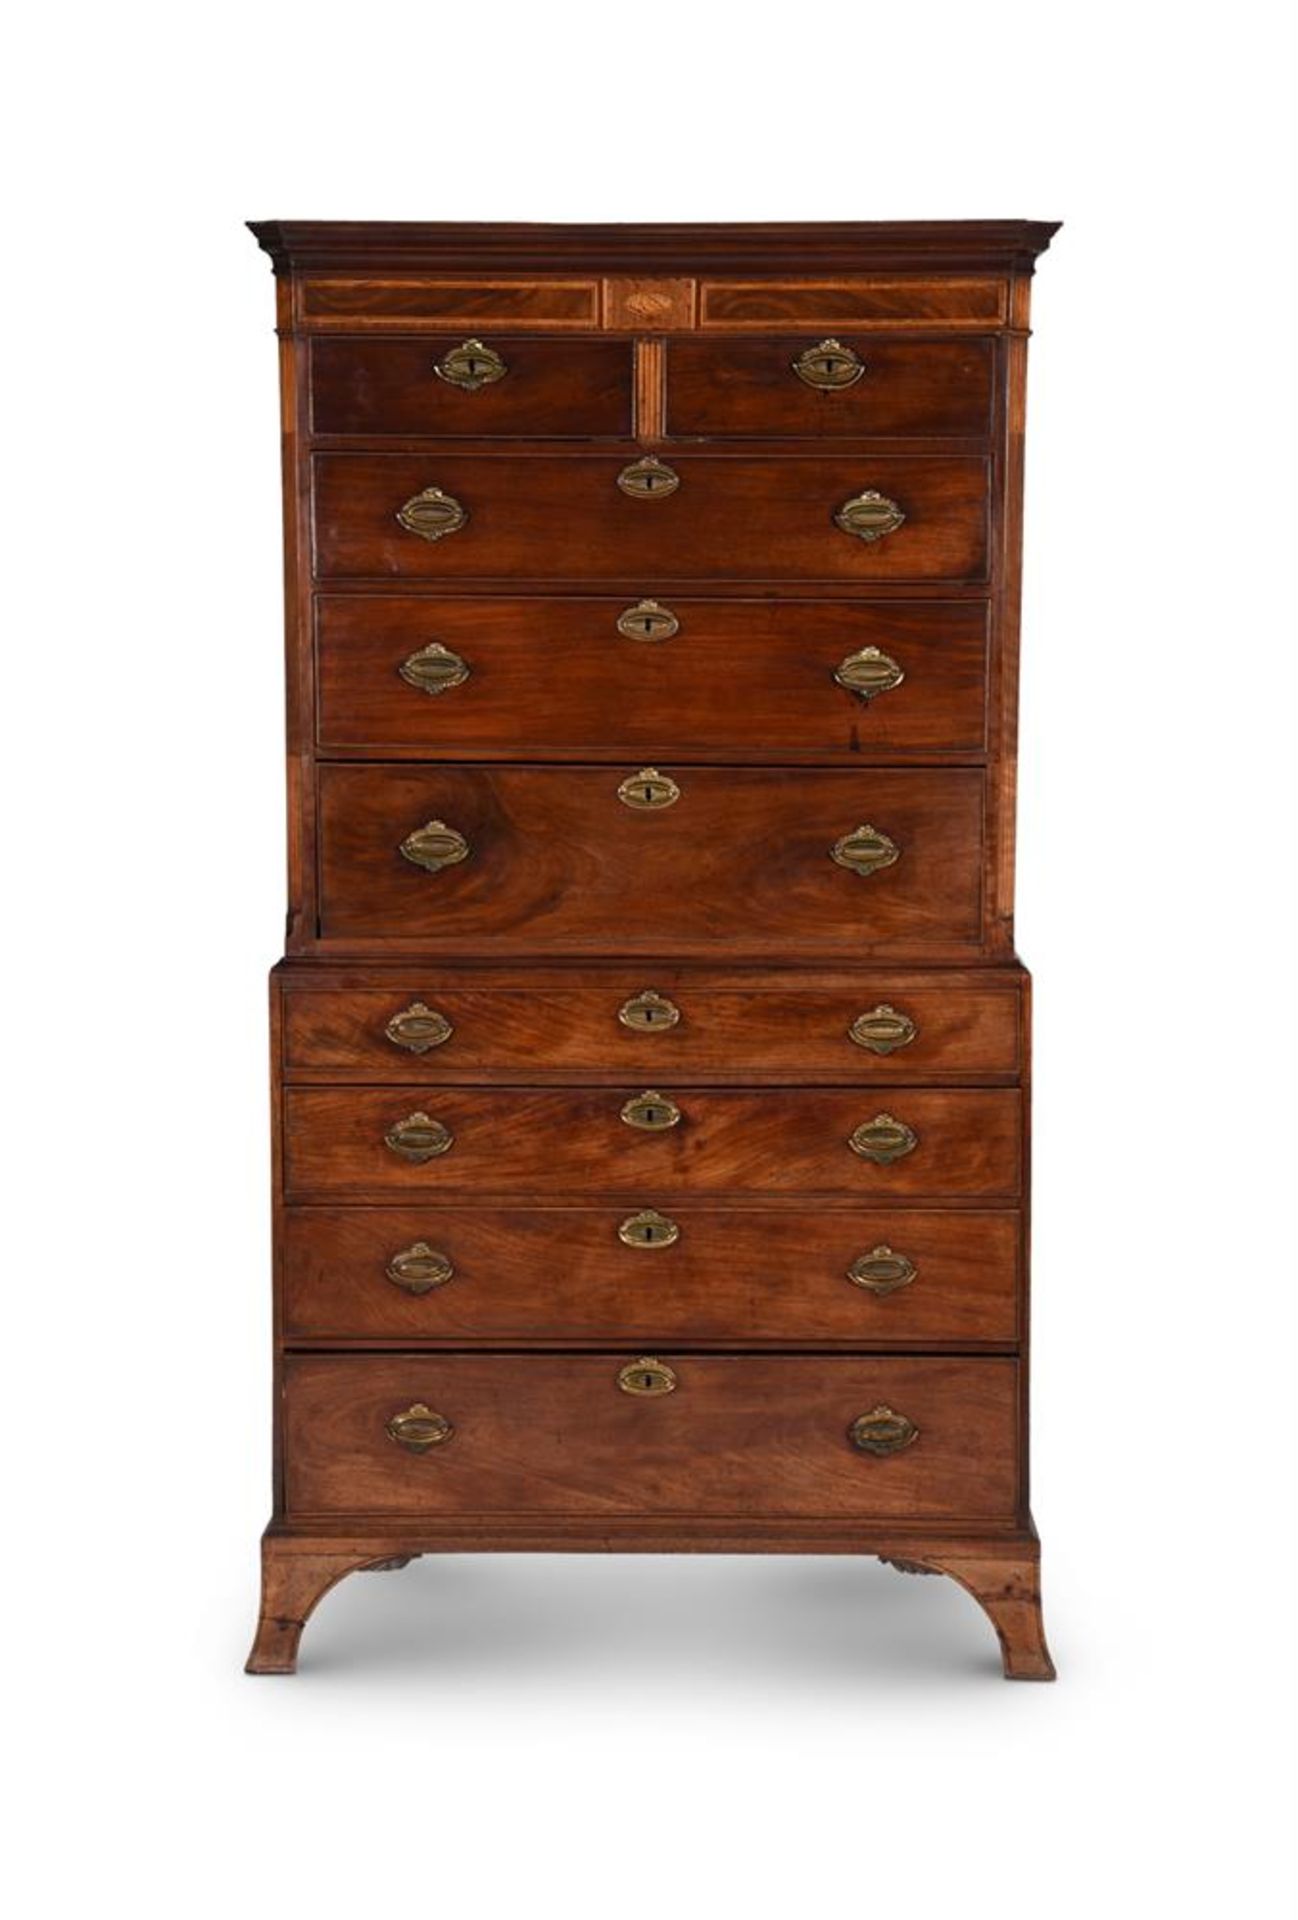 A GEORGE III FIGURED MAHOGANY AND INLAID CHEST ON CHEST, IN THE MANNER OF THOMAS SHERATON